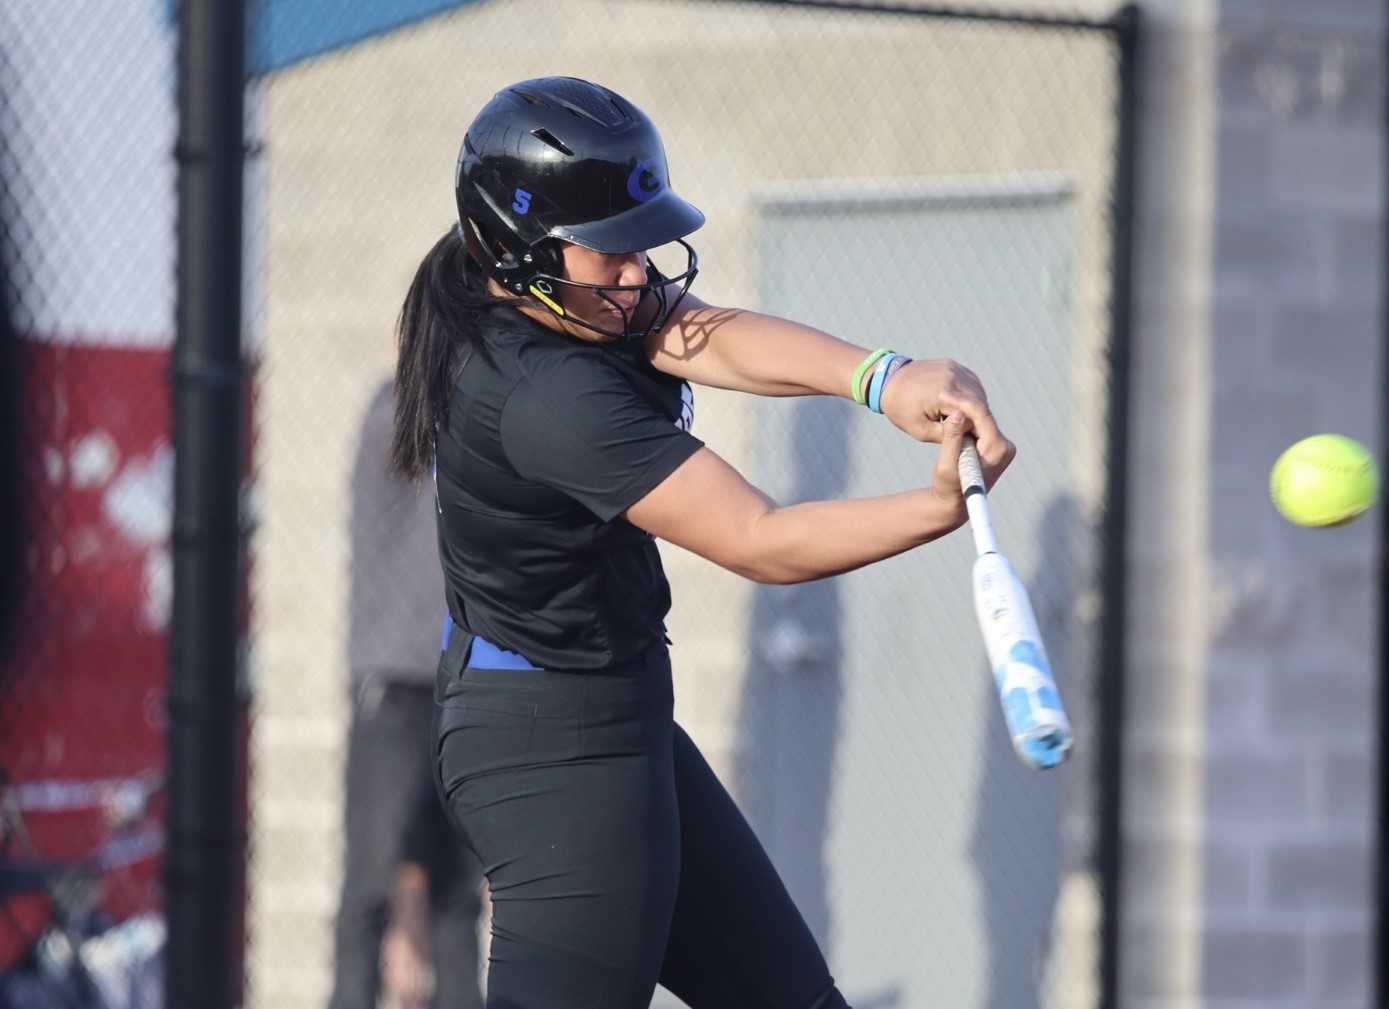 Sophomore Maddy Sagapolutele hit three home runs in her second game with Gresham. (Photo by Erin Gardenhire)